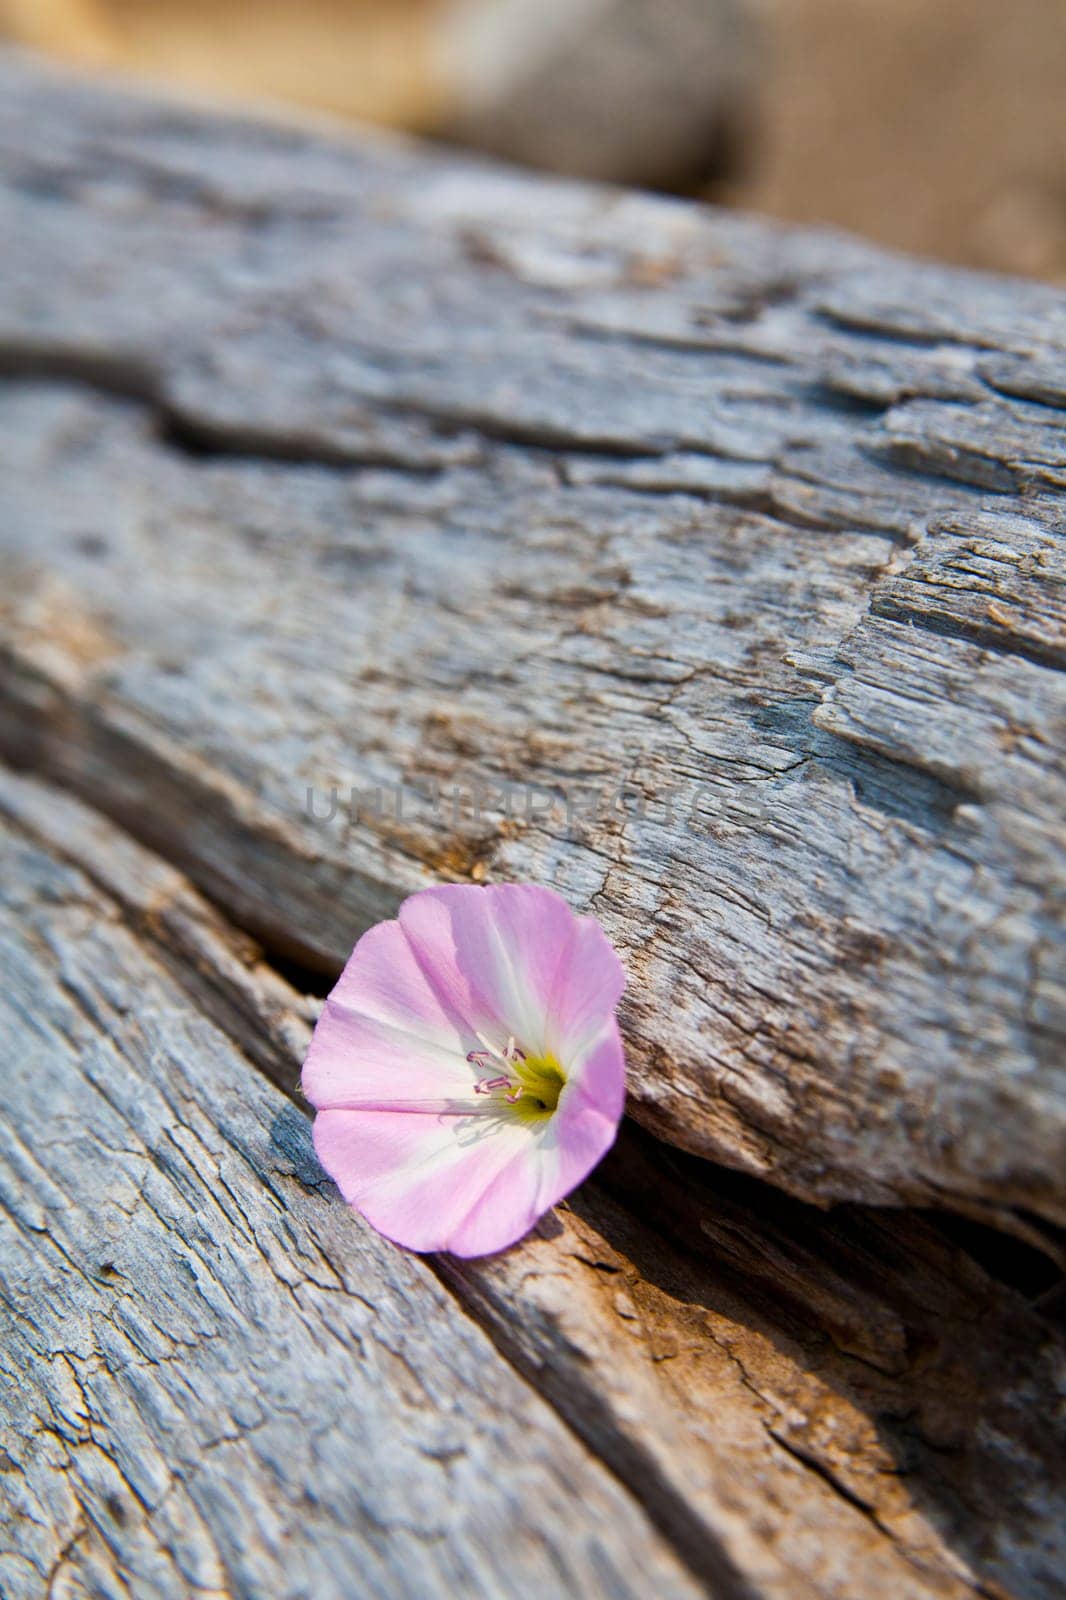 Delicate pink flower blooms amidst aged wooden backdrop, showcasing the beauty of nature's resilience and the passage of time.